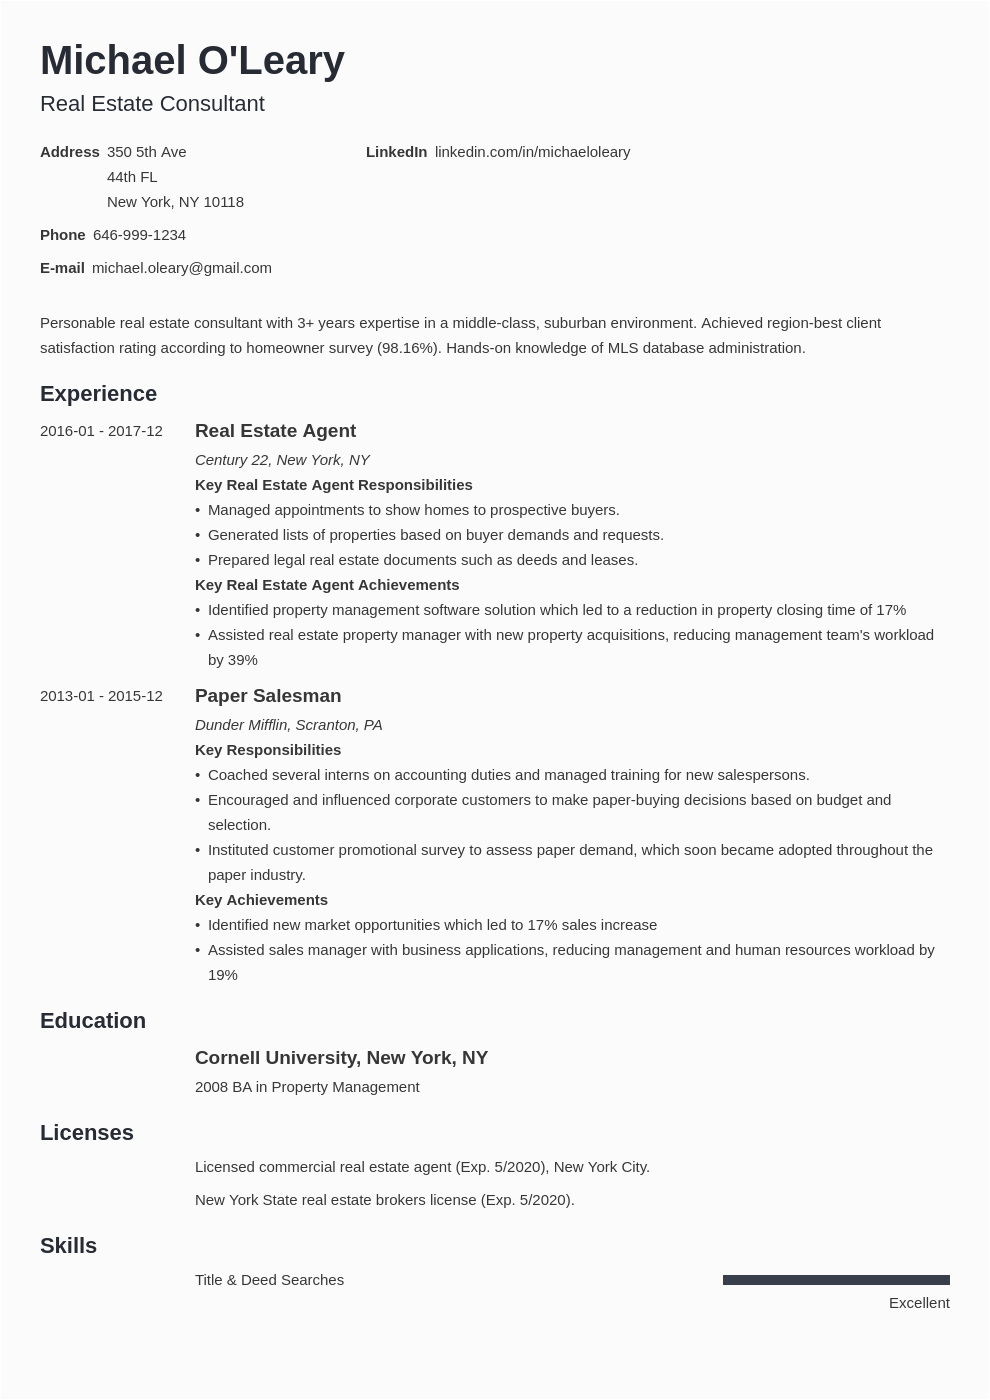 Resume Sample for Real Estate Agent with Experience Download 9 Real Estate Agent Resume